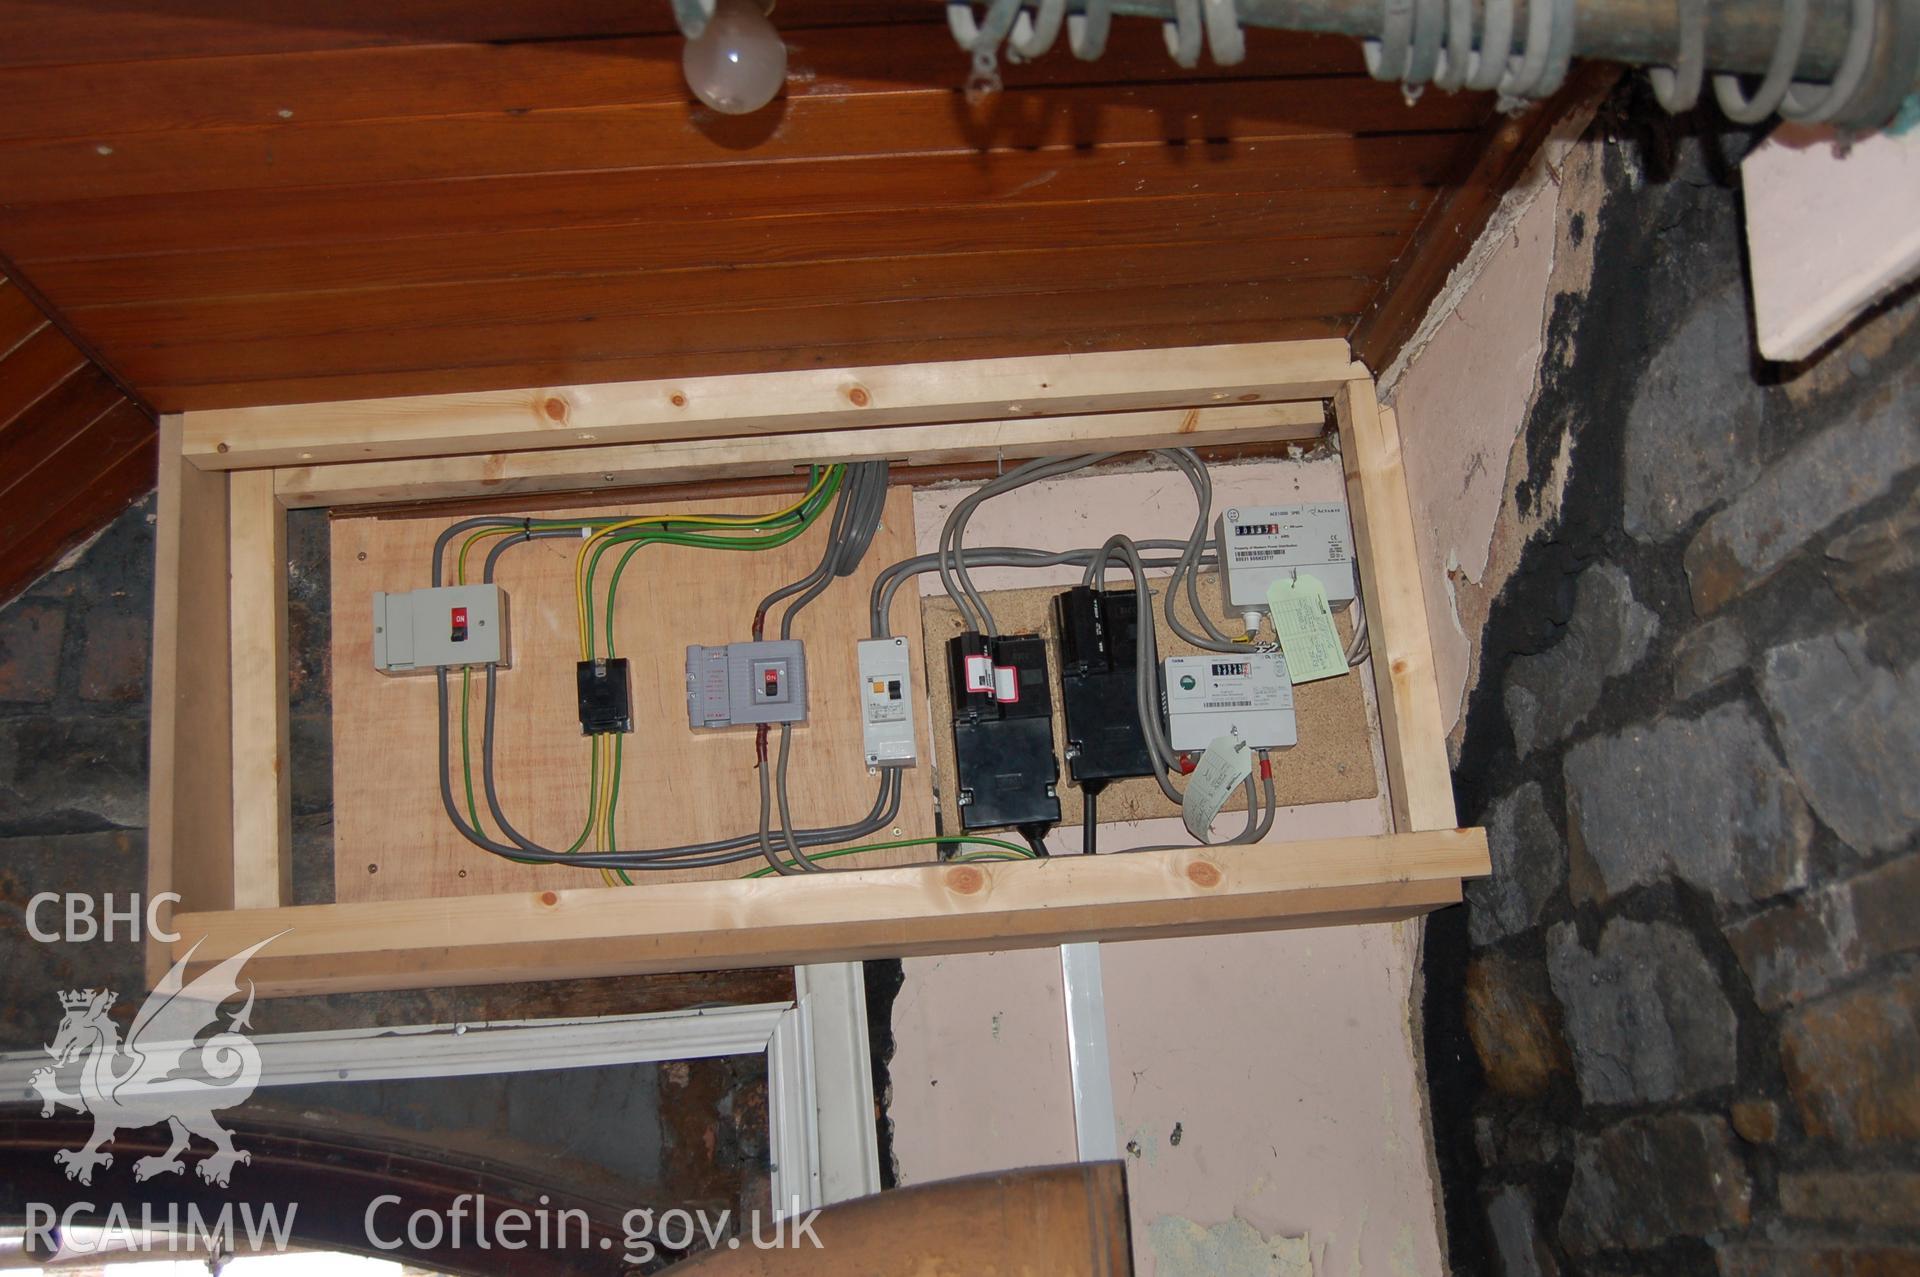 Digital colour photograph showing fuse boxes and electrical wiring above a doorway at the Van Road United Reformed Church.